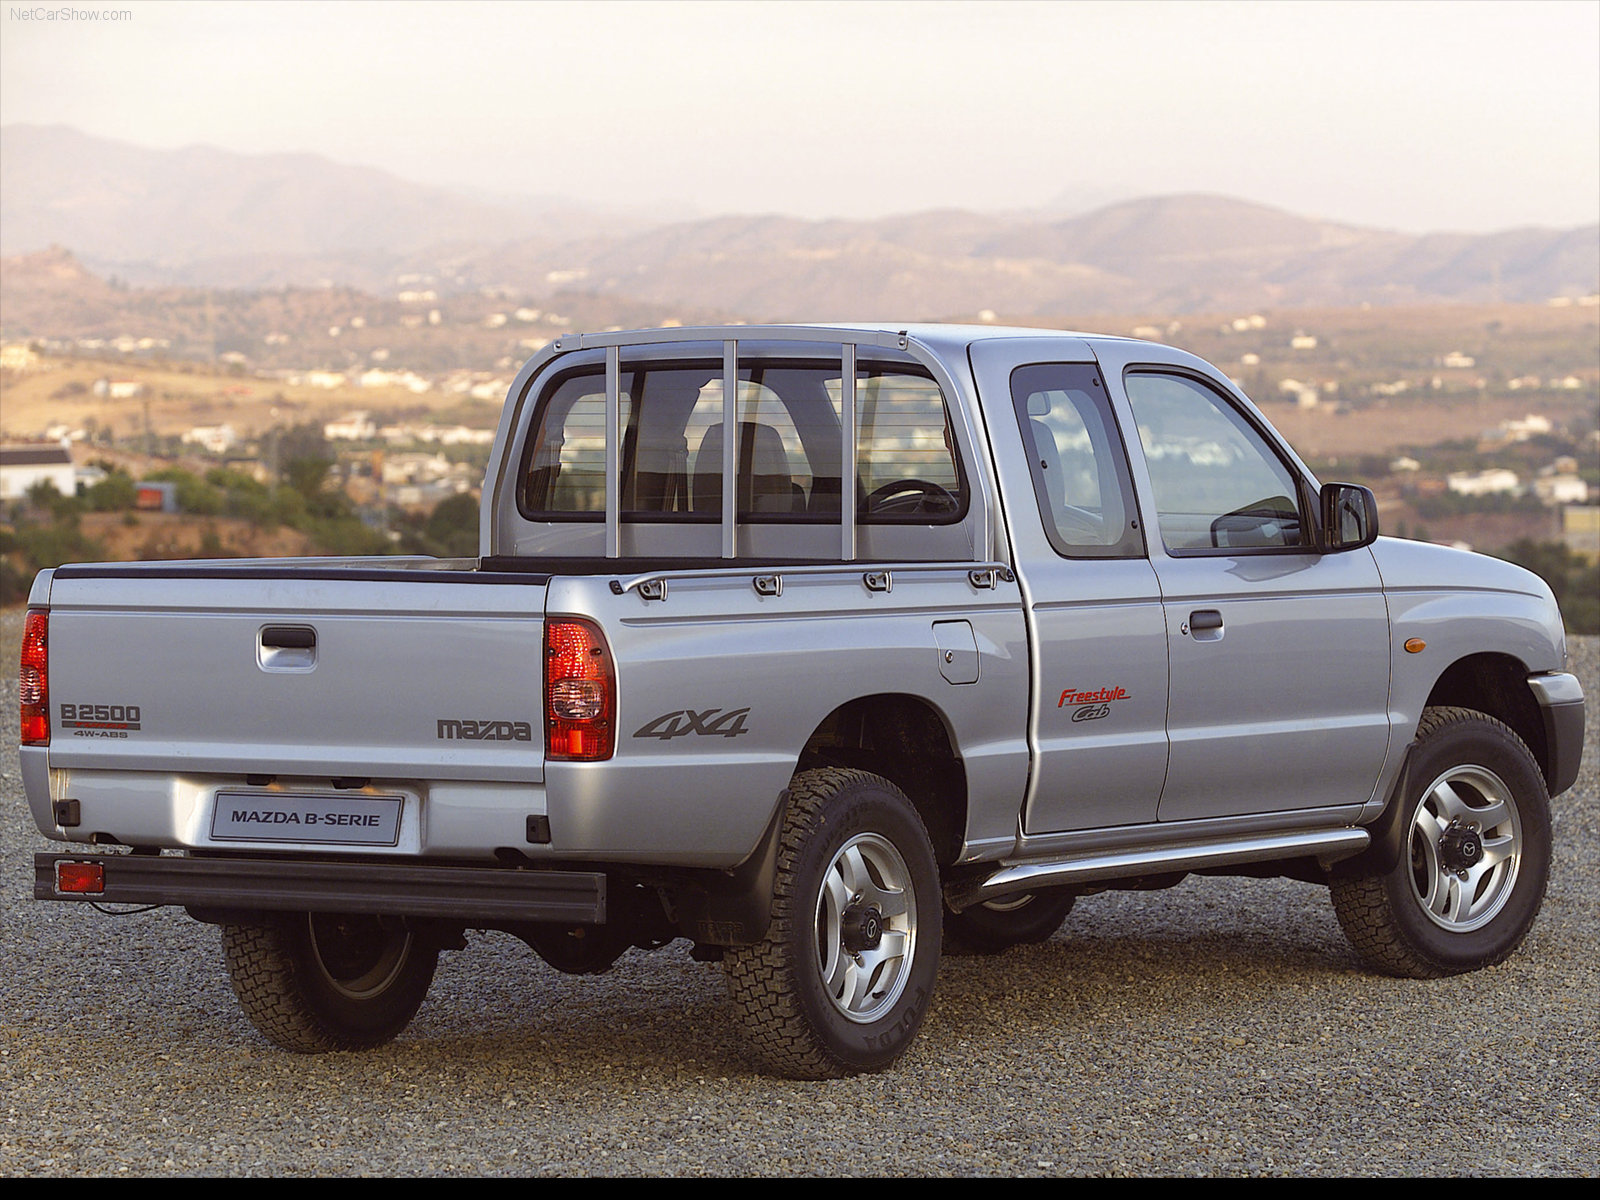 You can vote for this Mazda B2500 photo